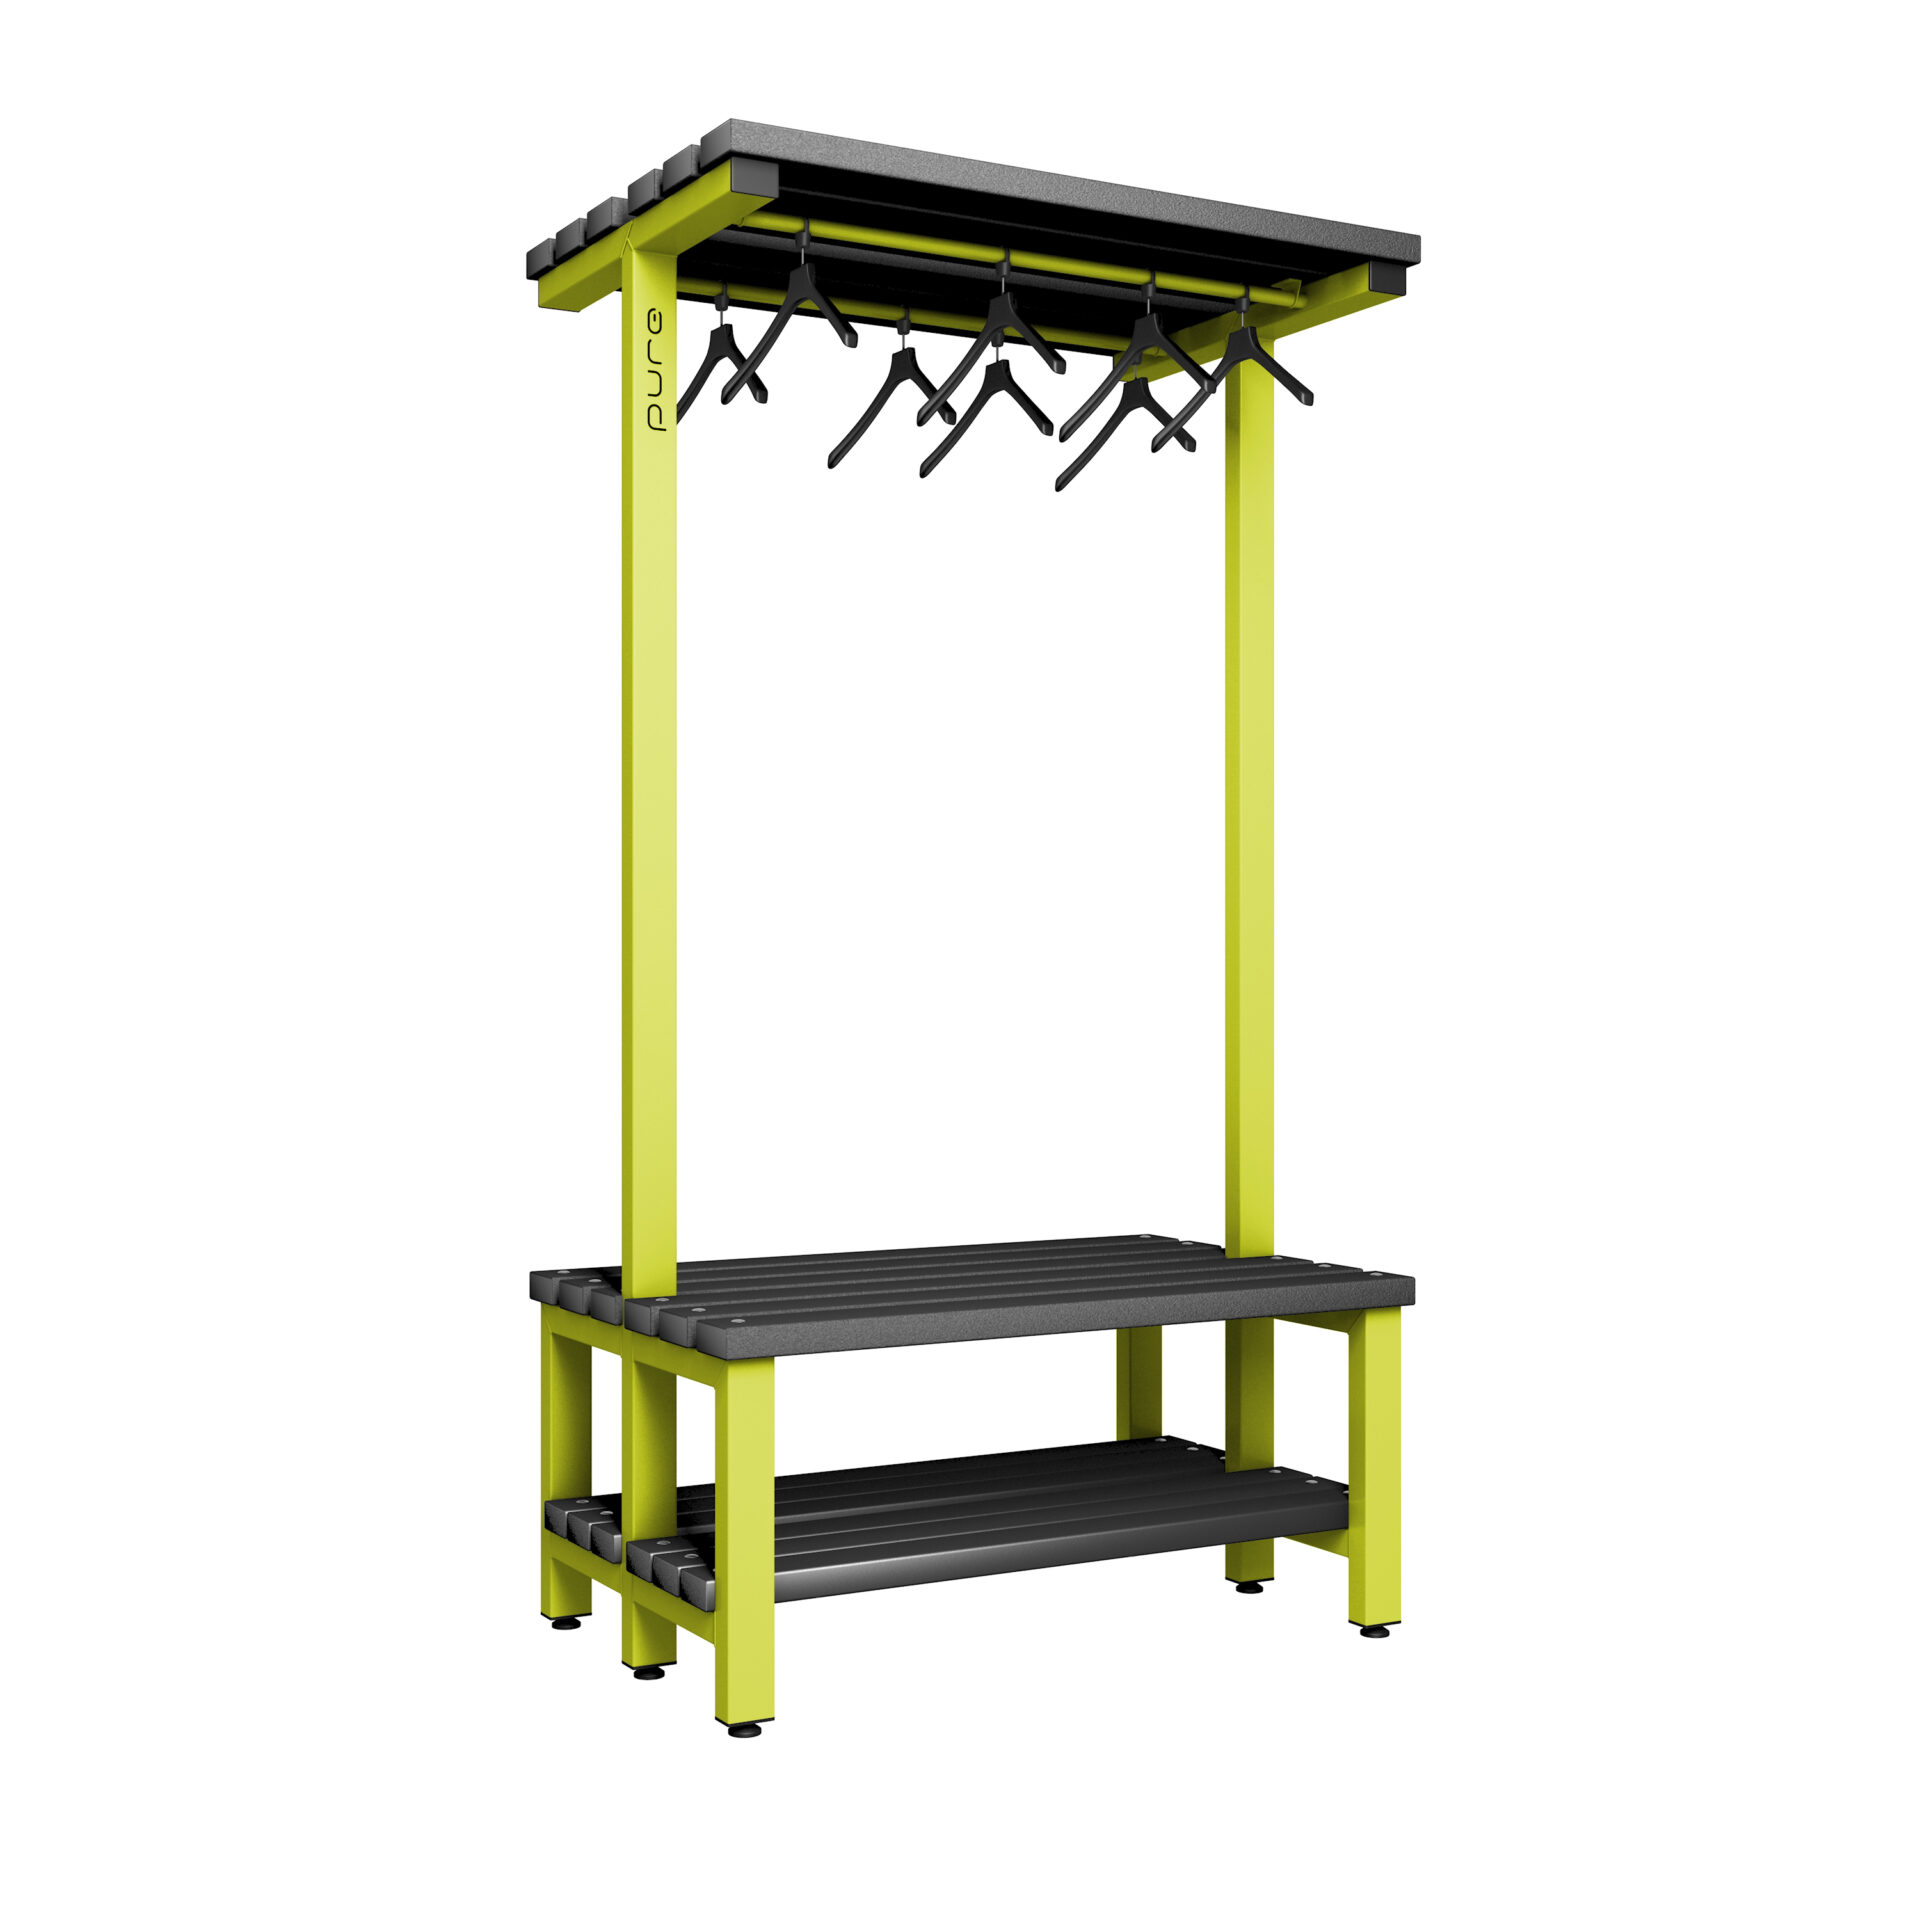 Pure Carbon Zero Double Sided 1000mm Overhead Hanging Bench With Shoe Shelf